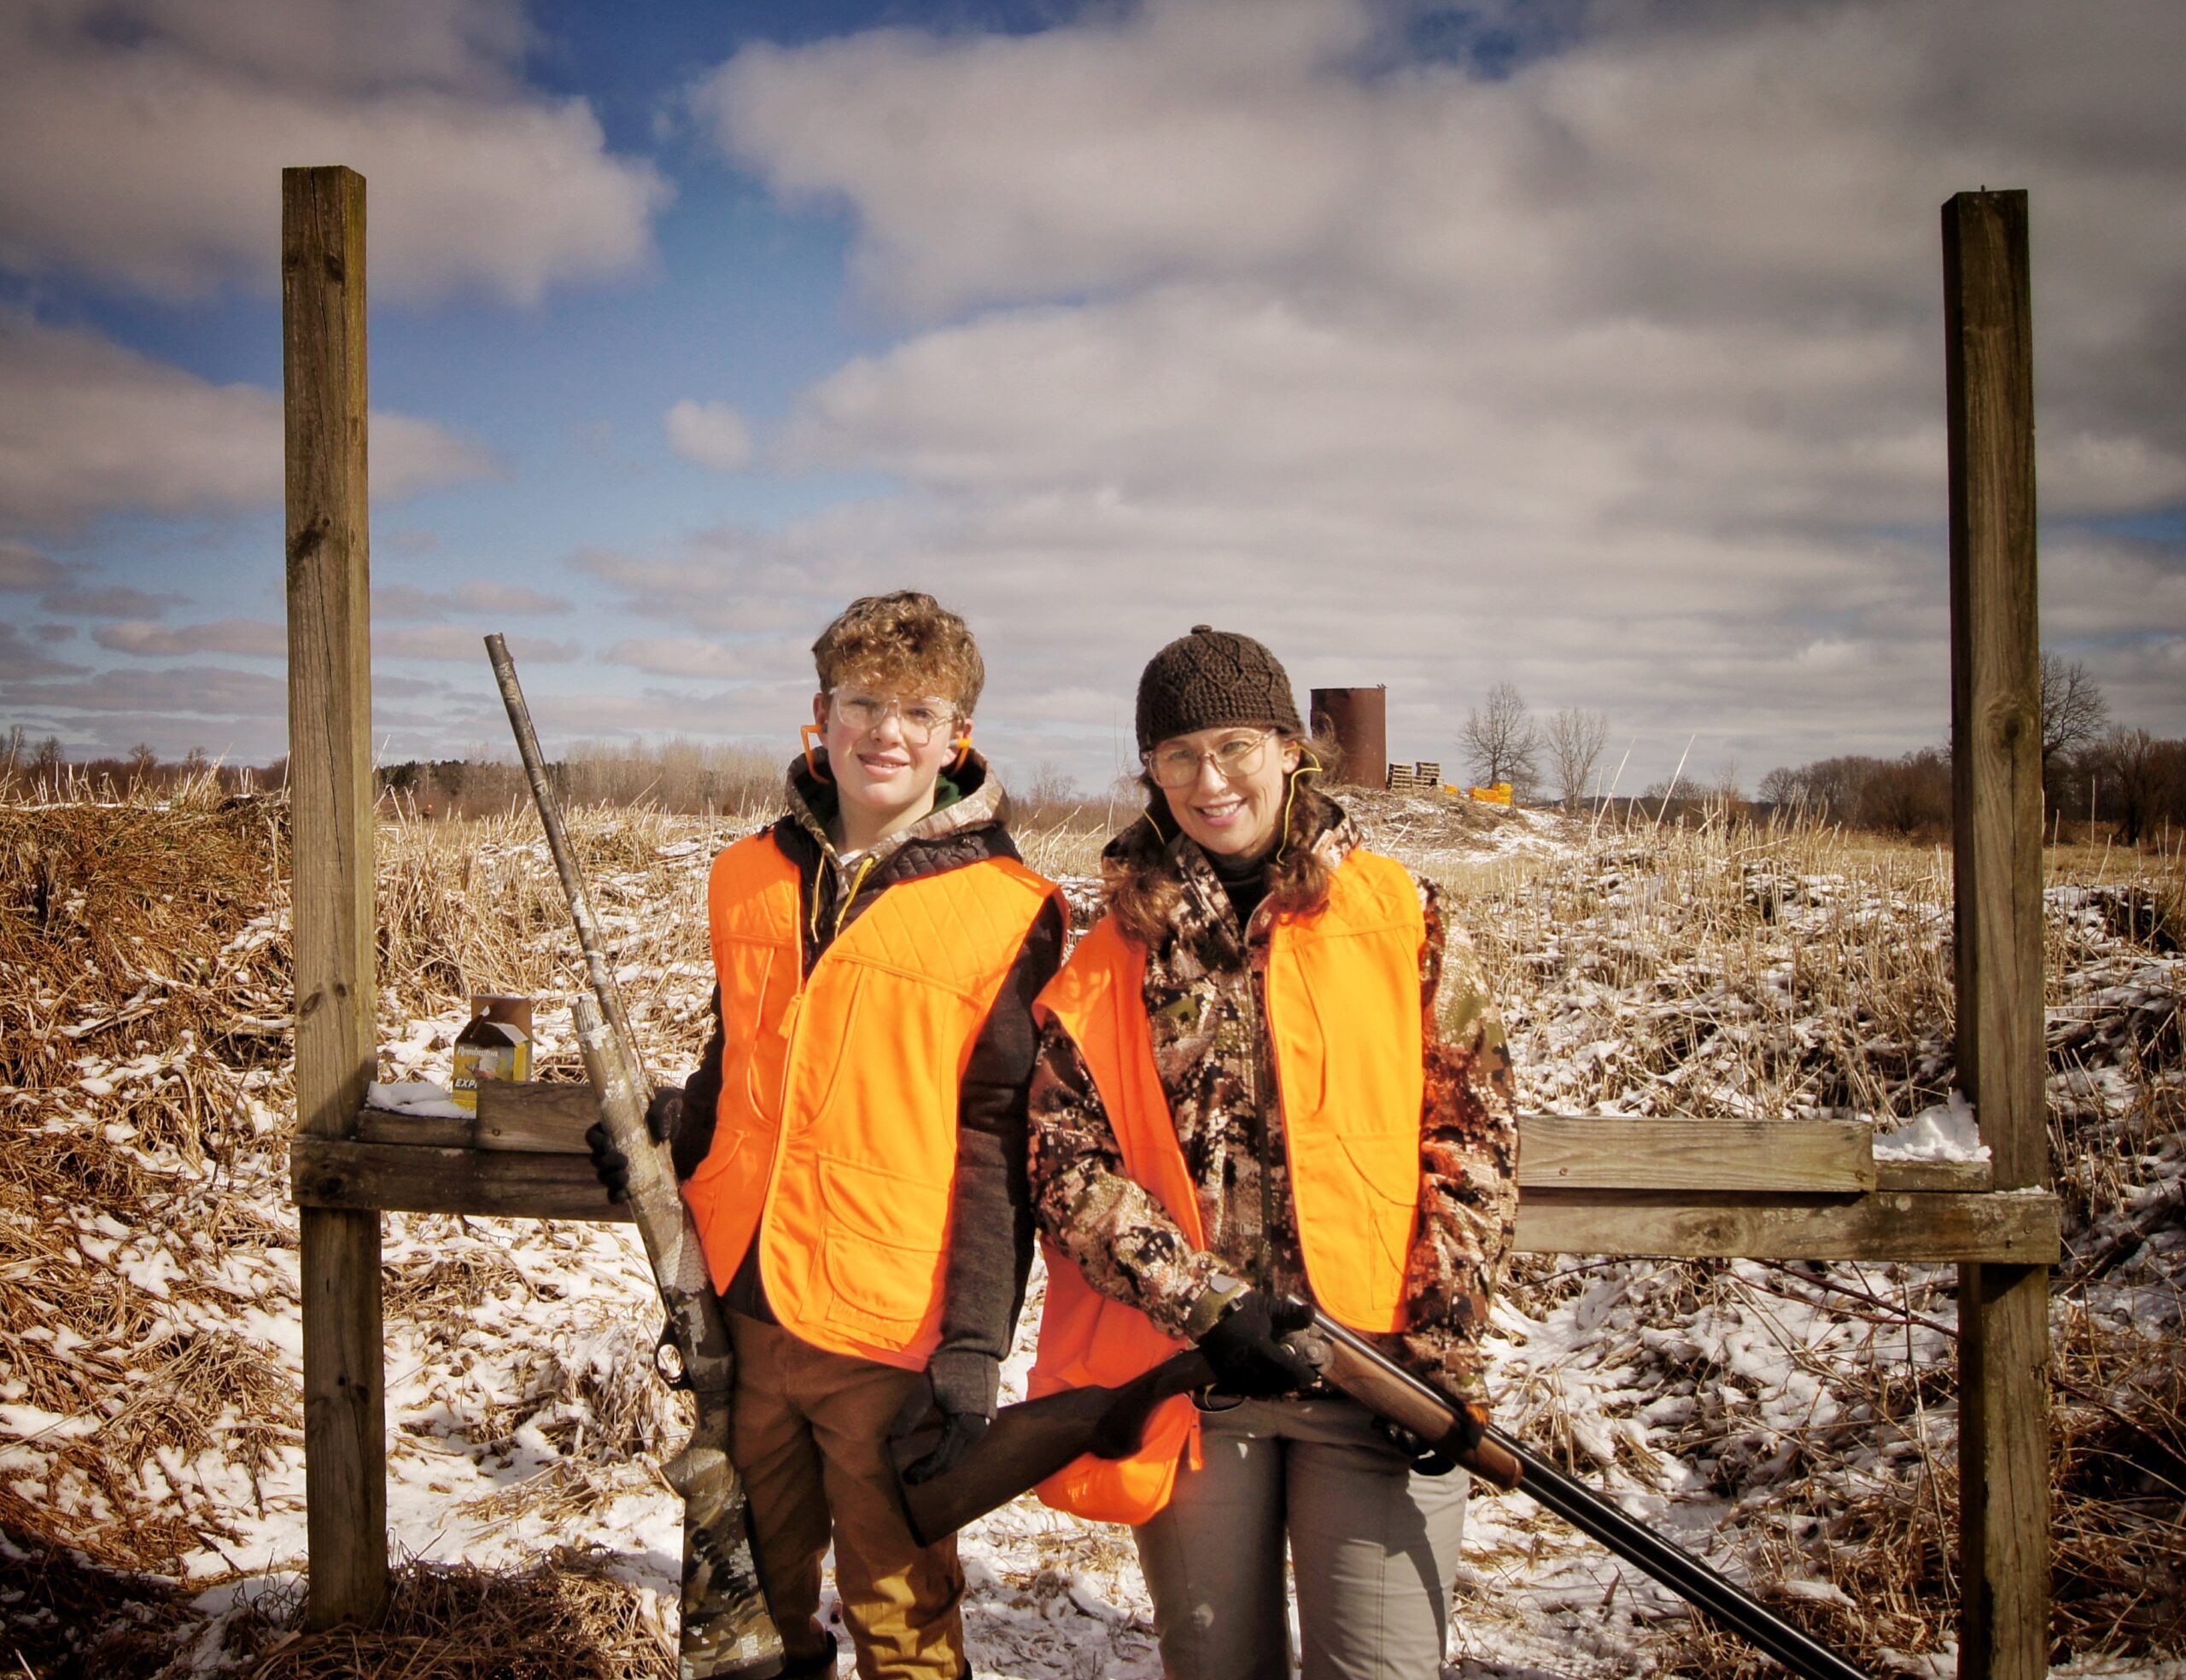 Two boys stand in an open field wearing hunting safety gear as they prepare for a pheasant hunt.